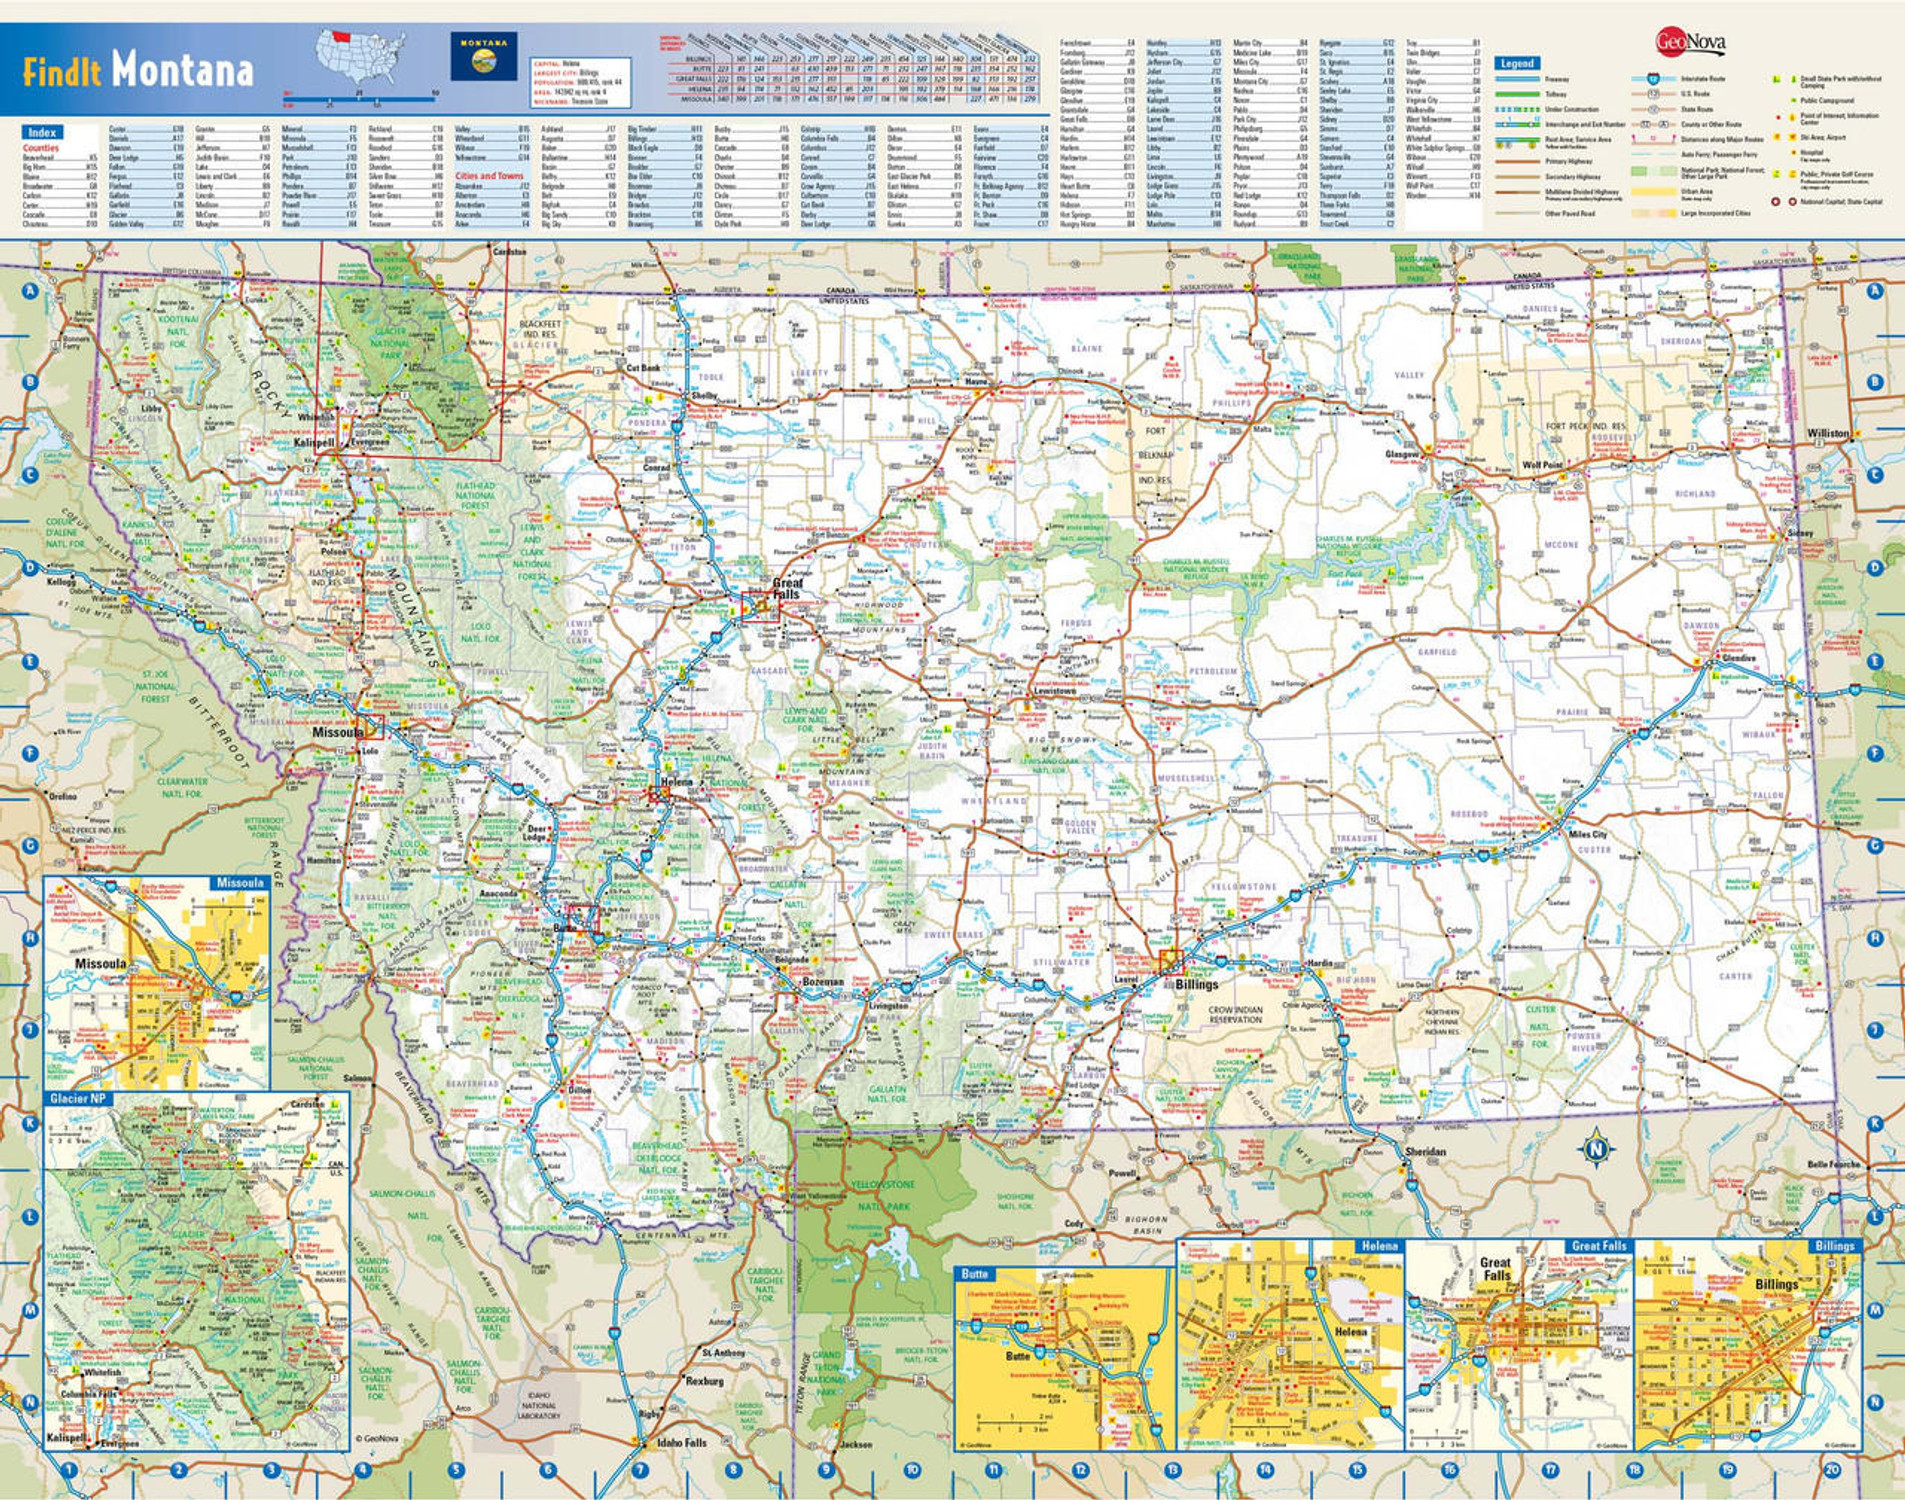 Montana Reference Wall Map, image 1, World Maps Online